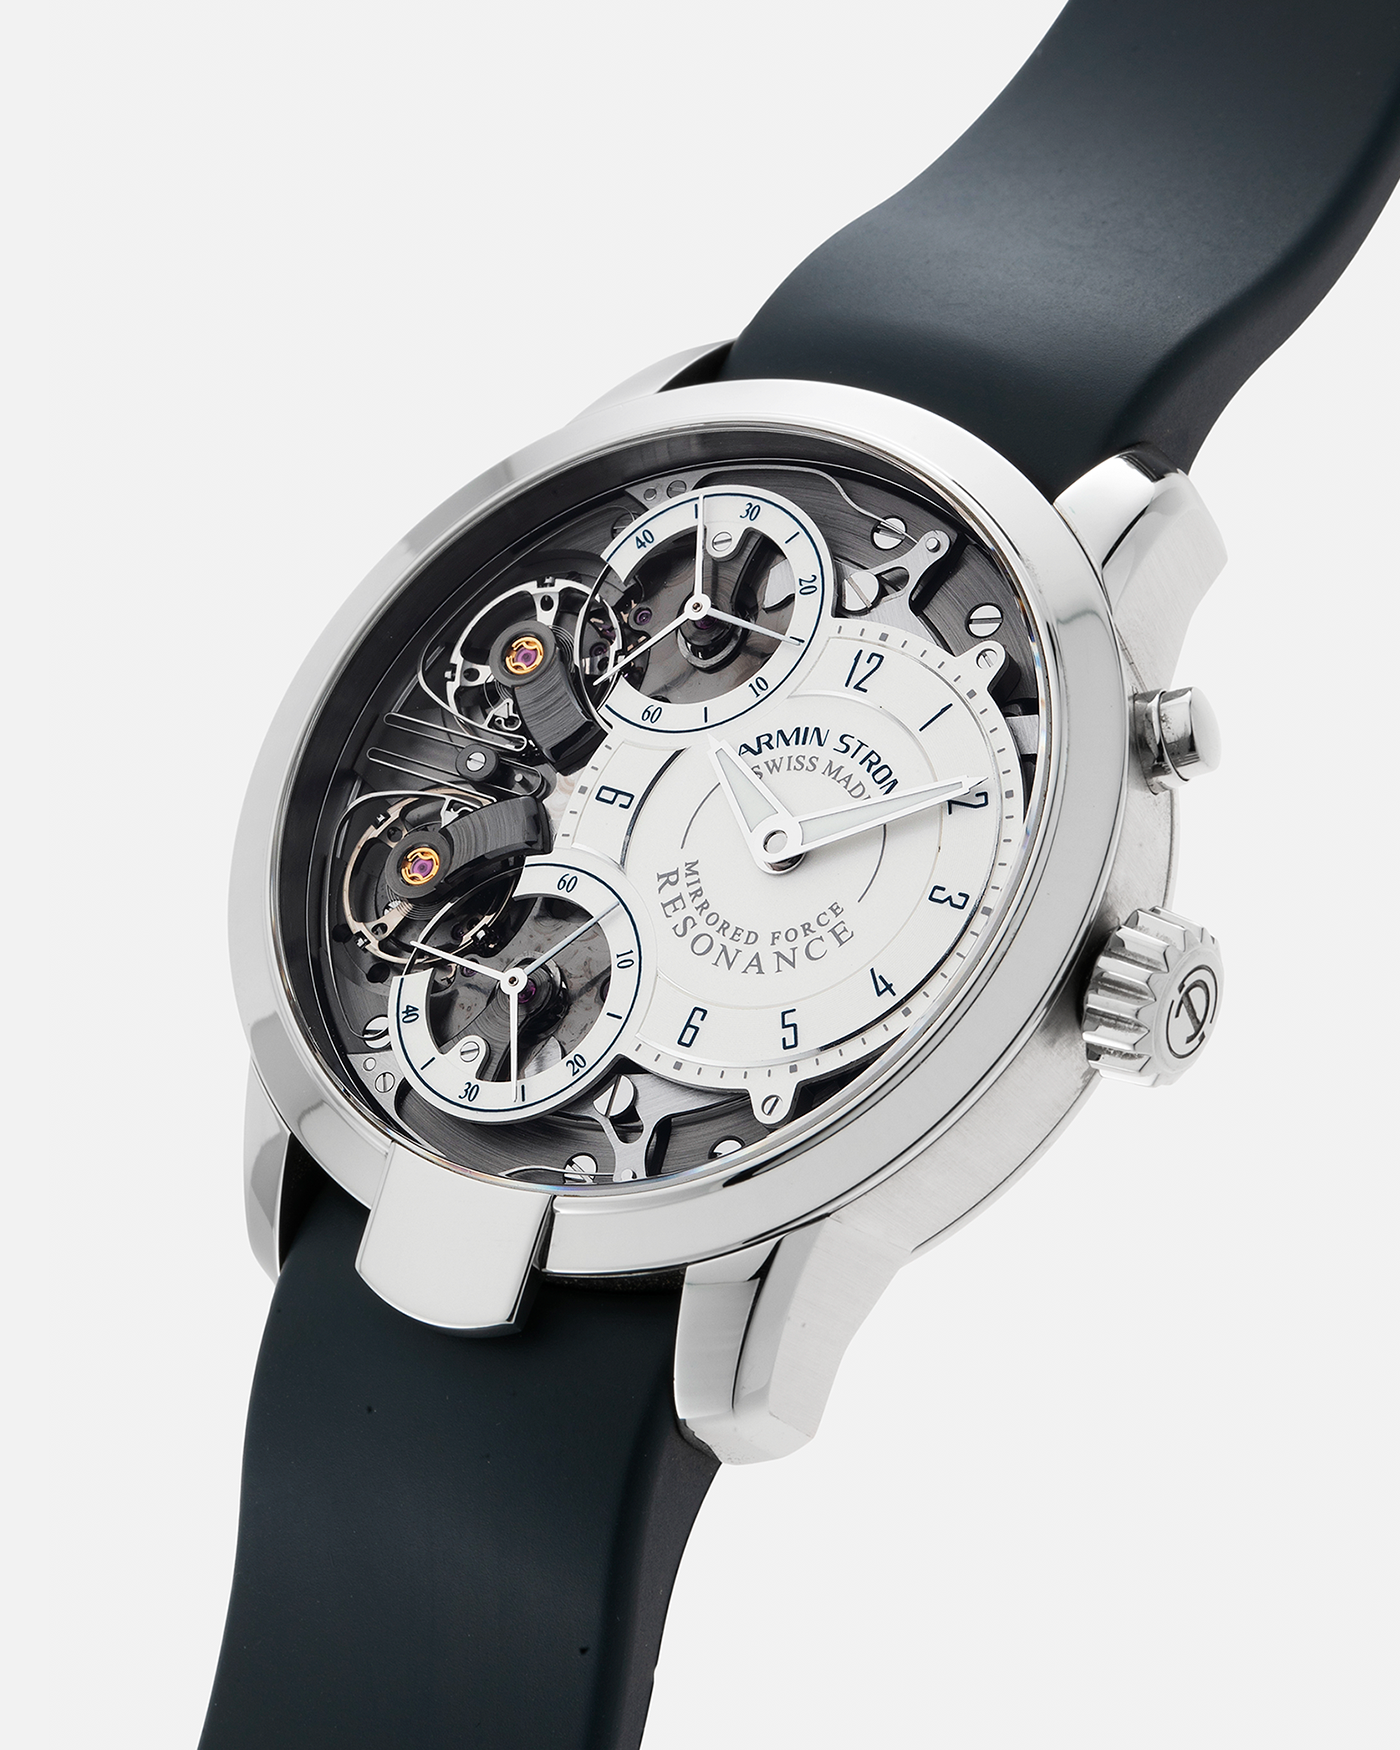 Brand: Armin Strom Year: 2017 Model: Mirrored Force Resonance ‘Water’, Limited Edition of 50 pieces Material: Stainless Steel Movement: Armin Strom Resonance Cal. ARF15, Manual-Winding Case Dimensions: 43.4mm x 13mm Lug Width: 22mm Strap: Armin Strom Dark Navy Rubber Strap with Signed Stainless Steel Tang Buckle